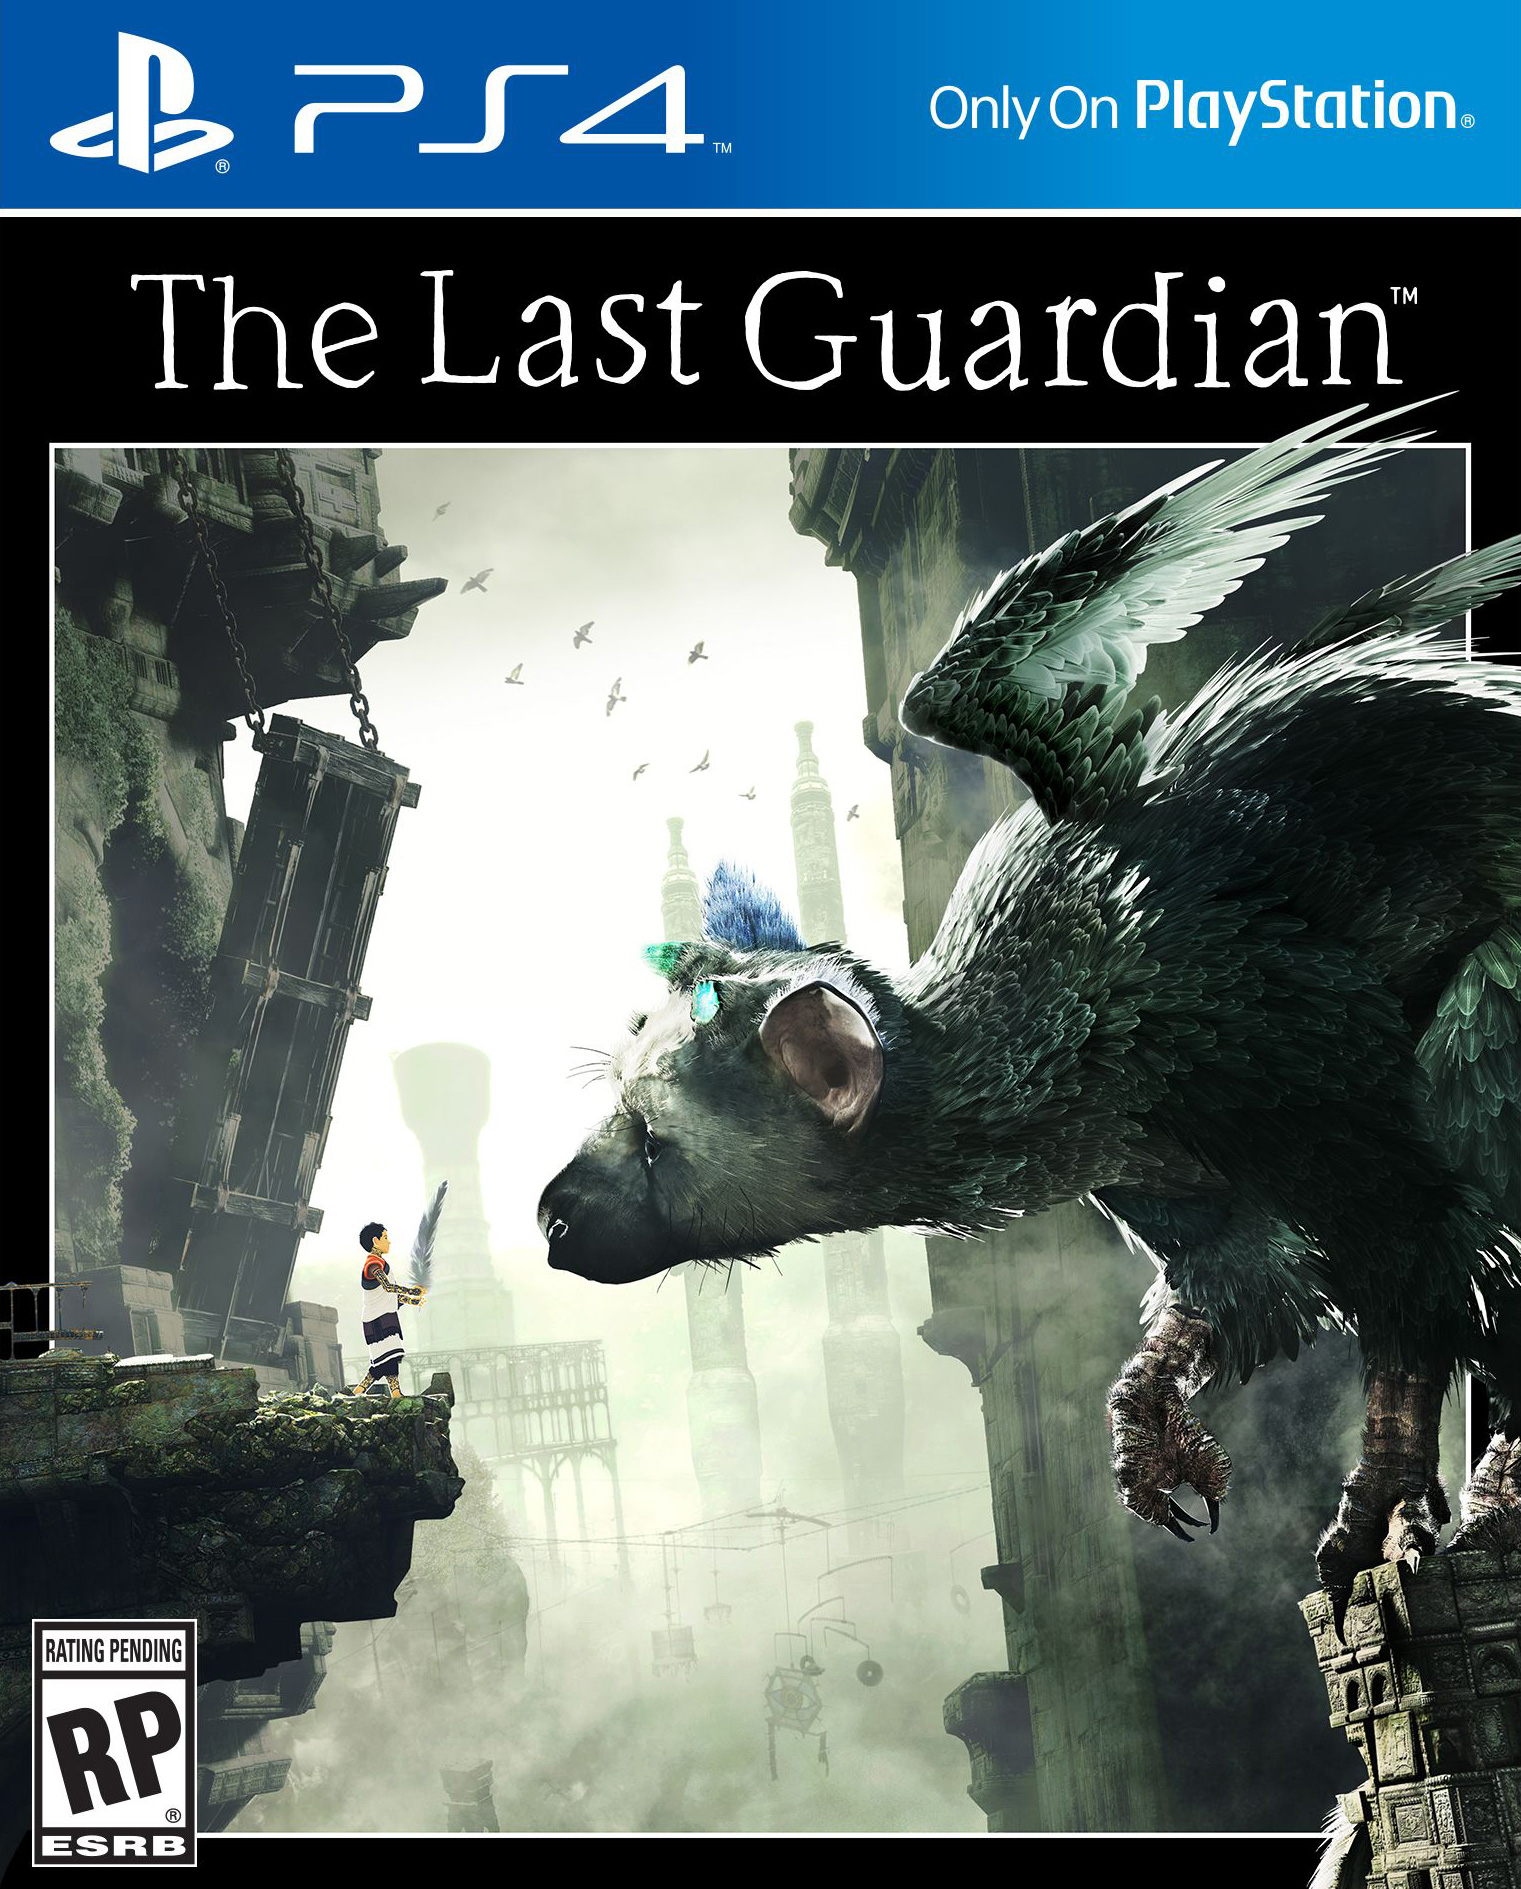 thelastguardian_cover